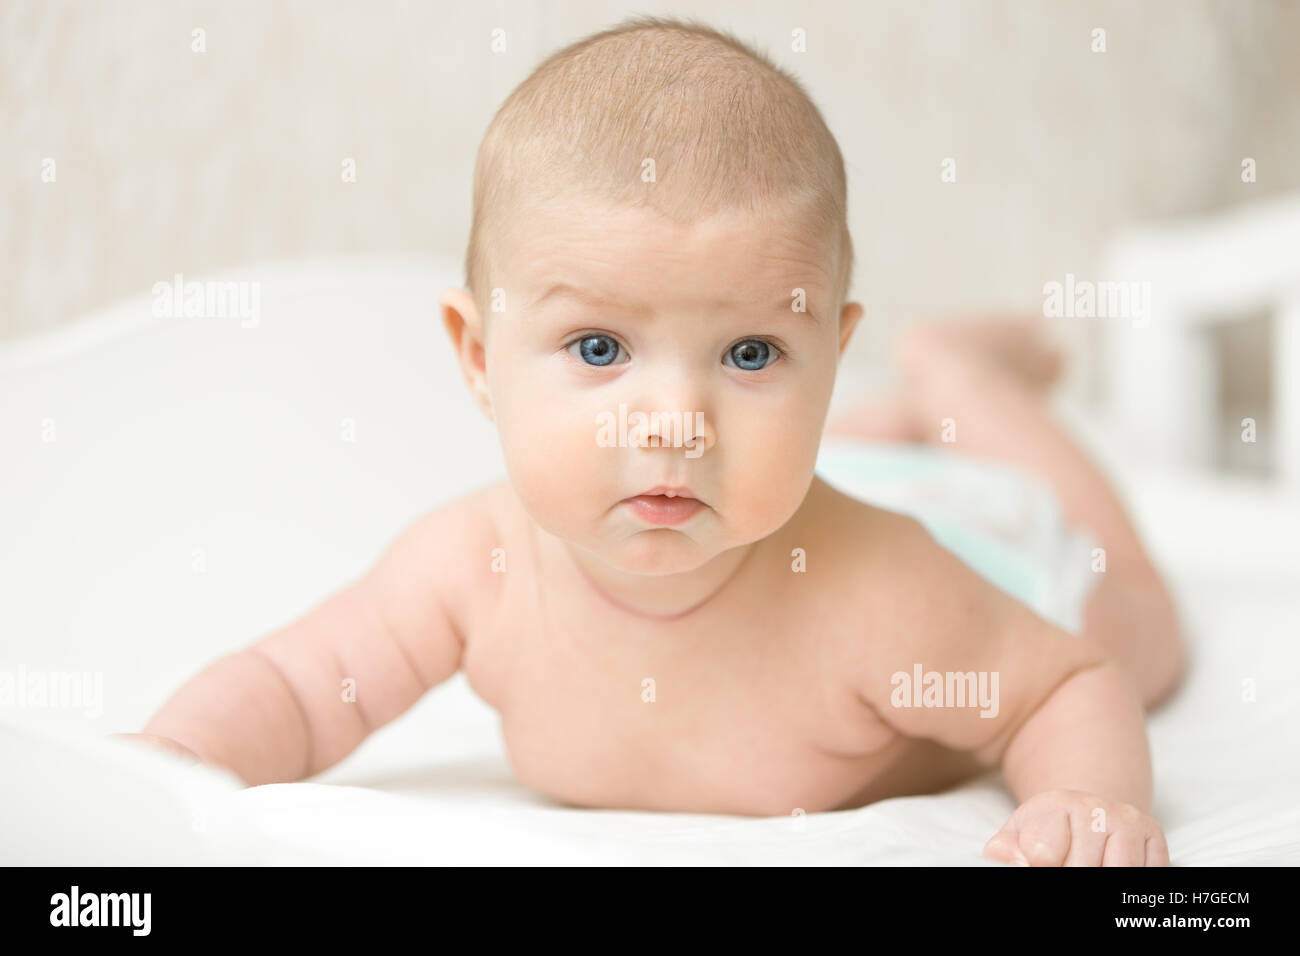 Portrait of a cute baby making questionable funny face Stock Photo